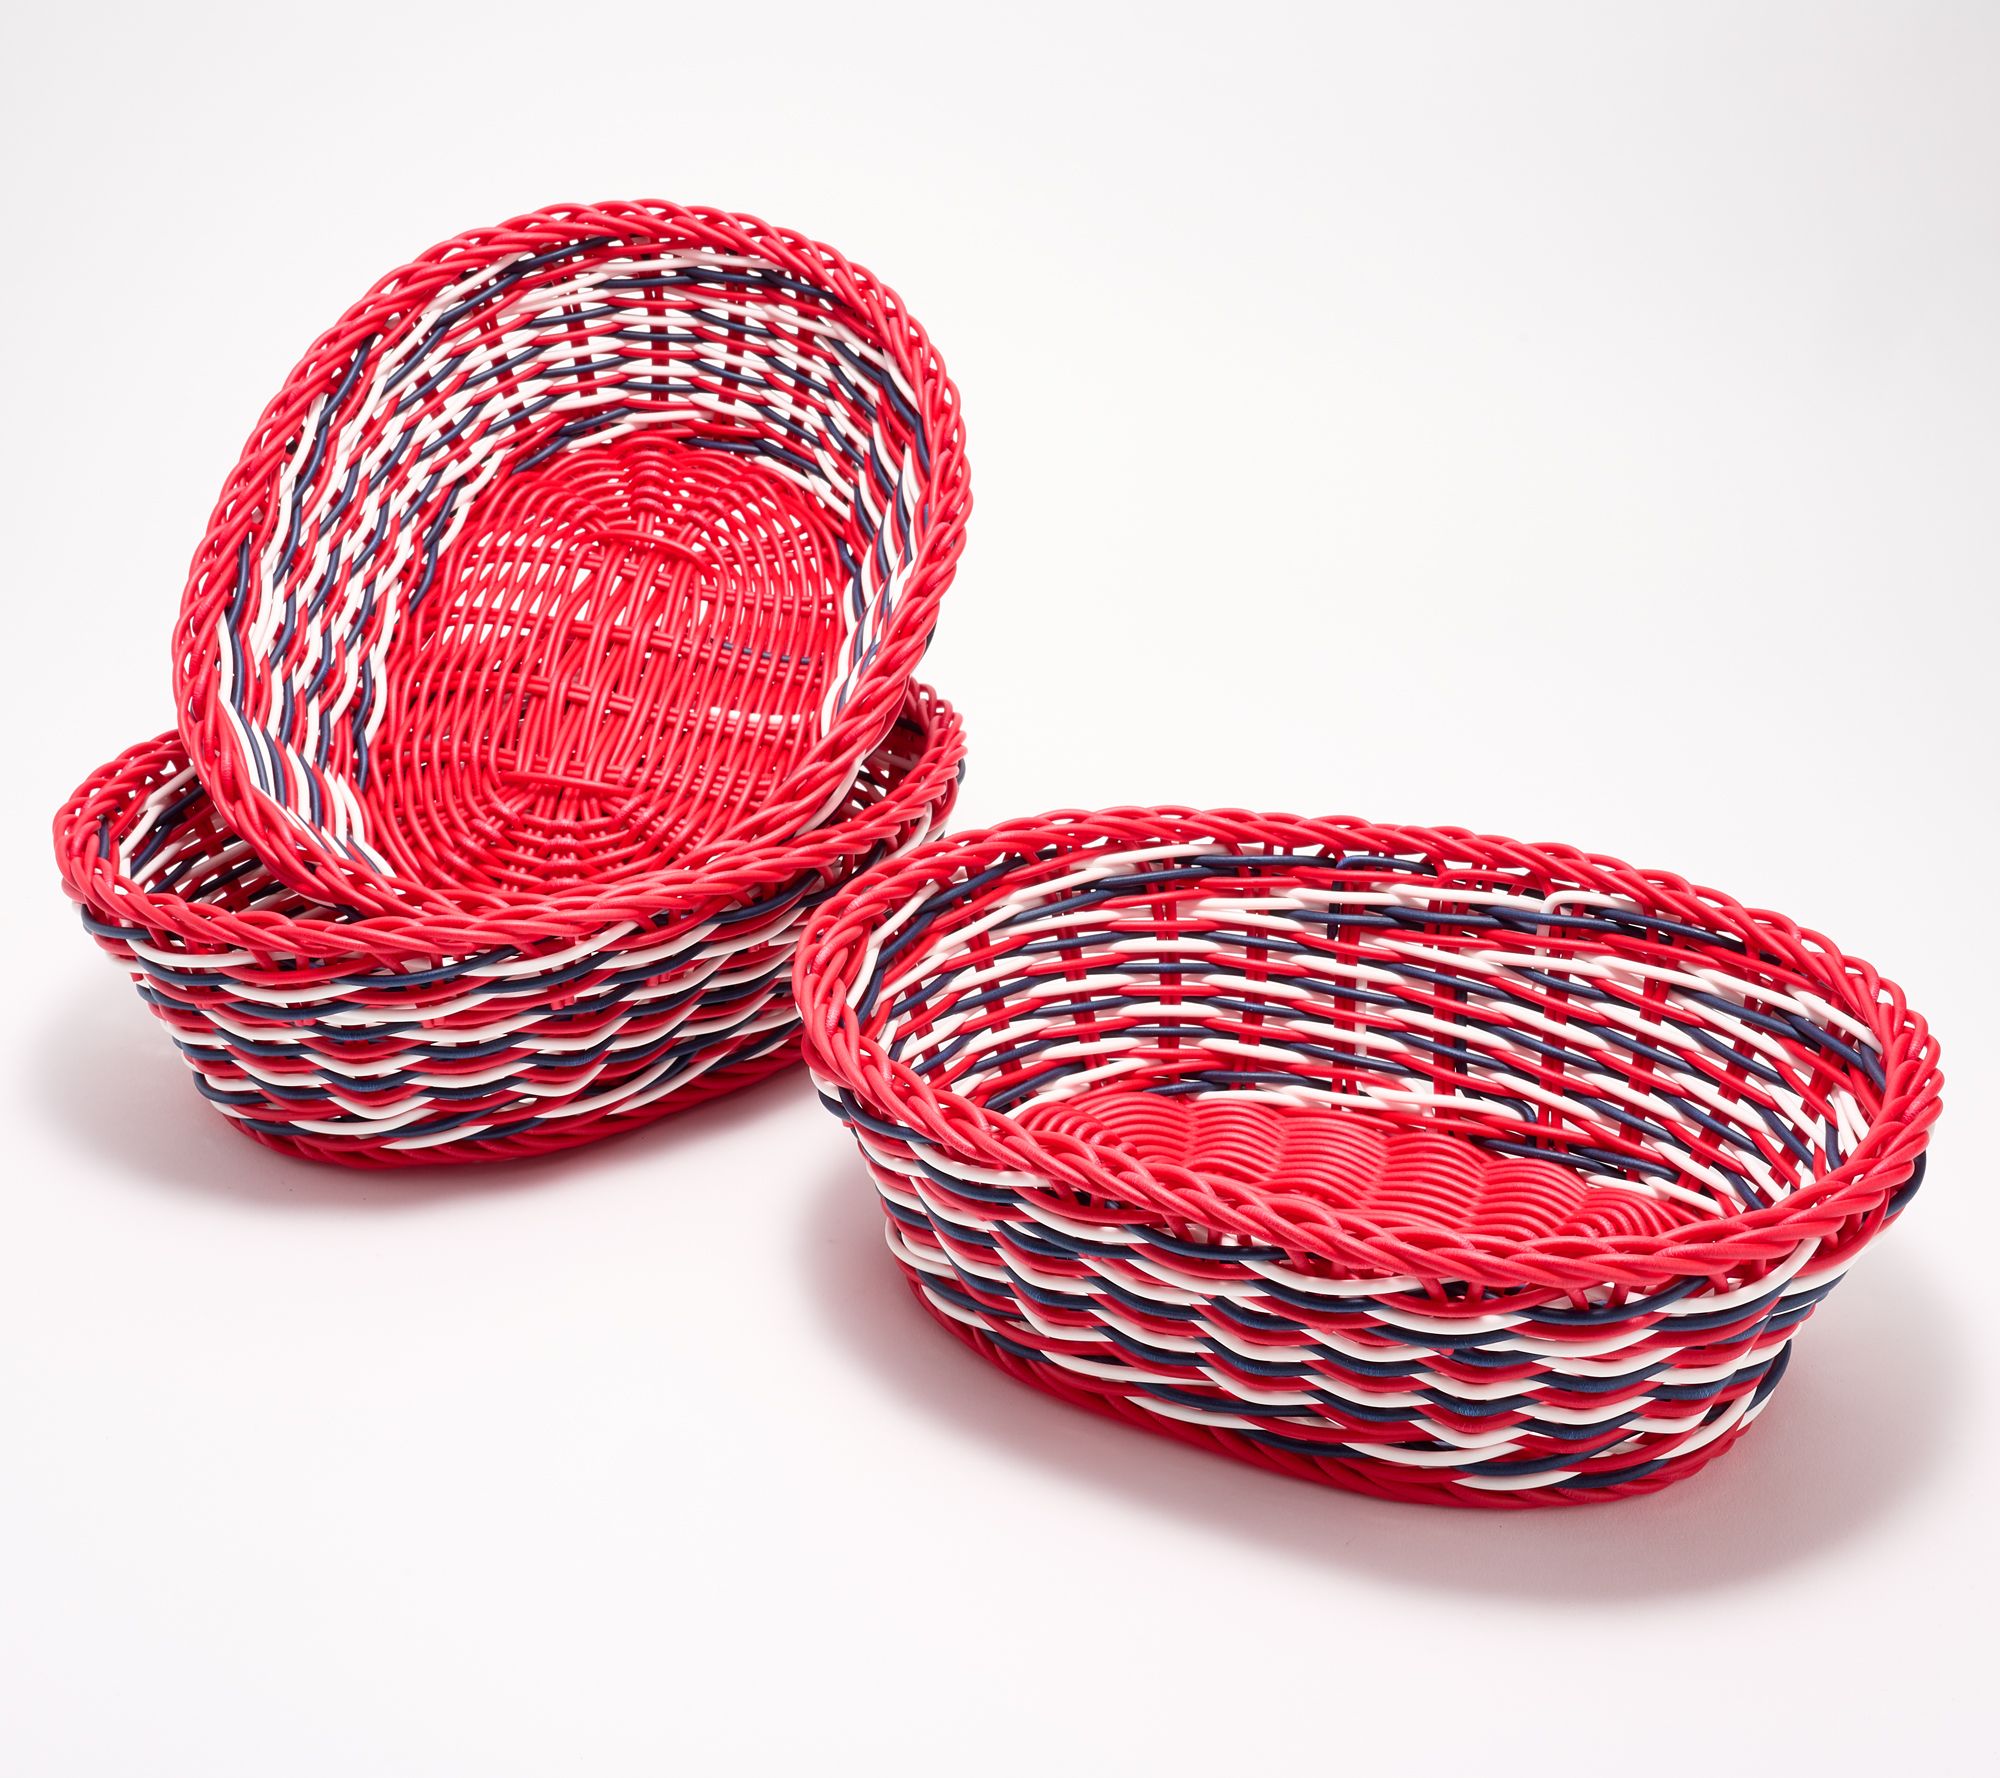 Constructive Playthings Small Square Plastic Woven Baskets (Set of 6)